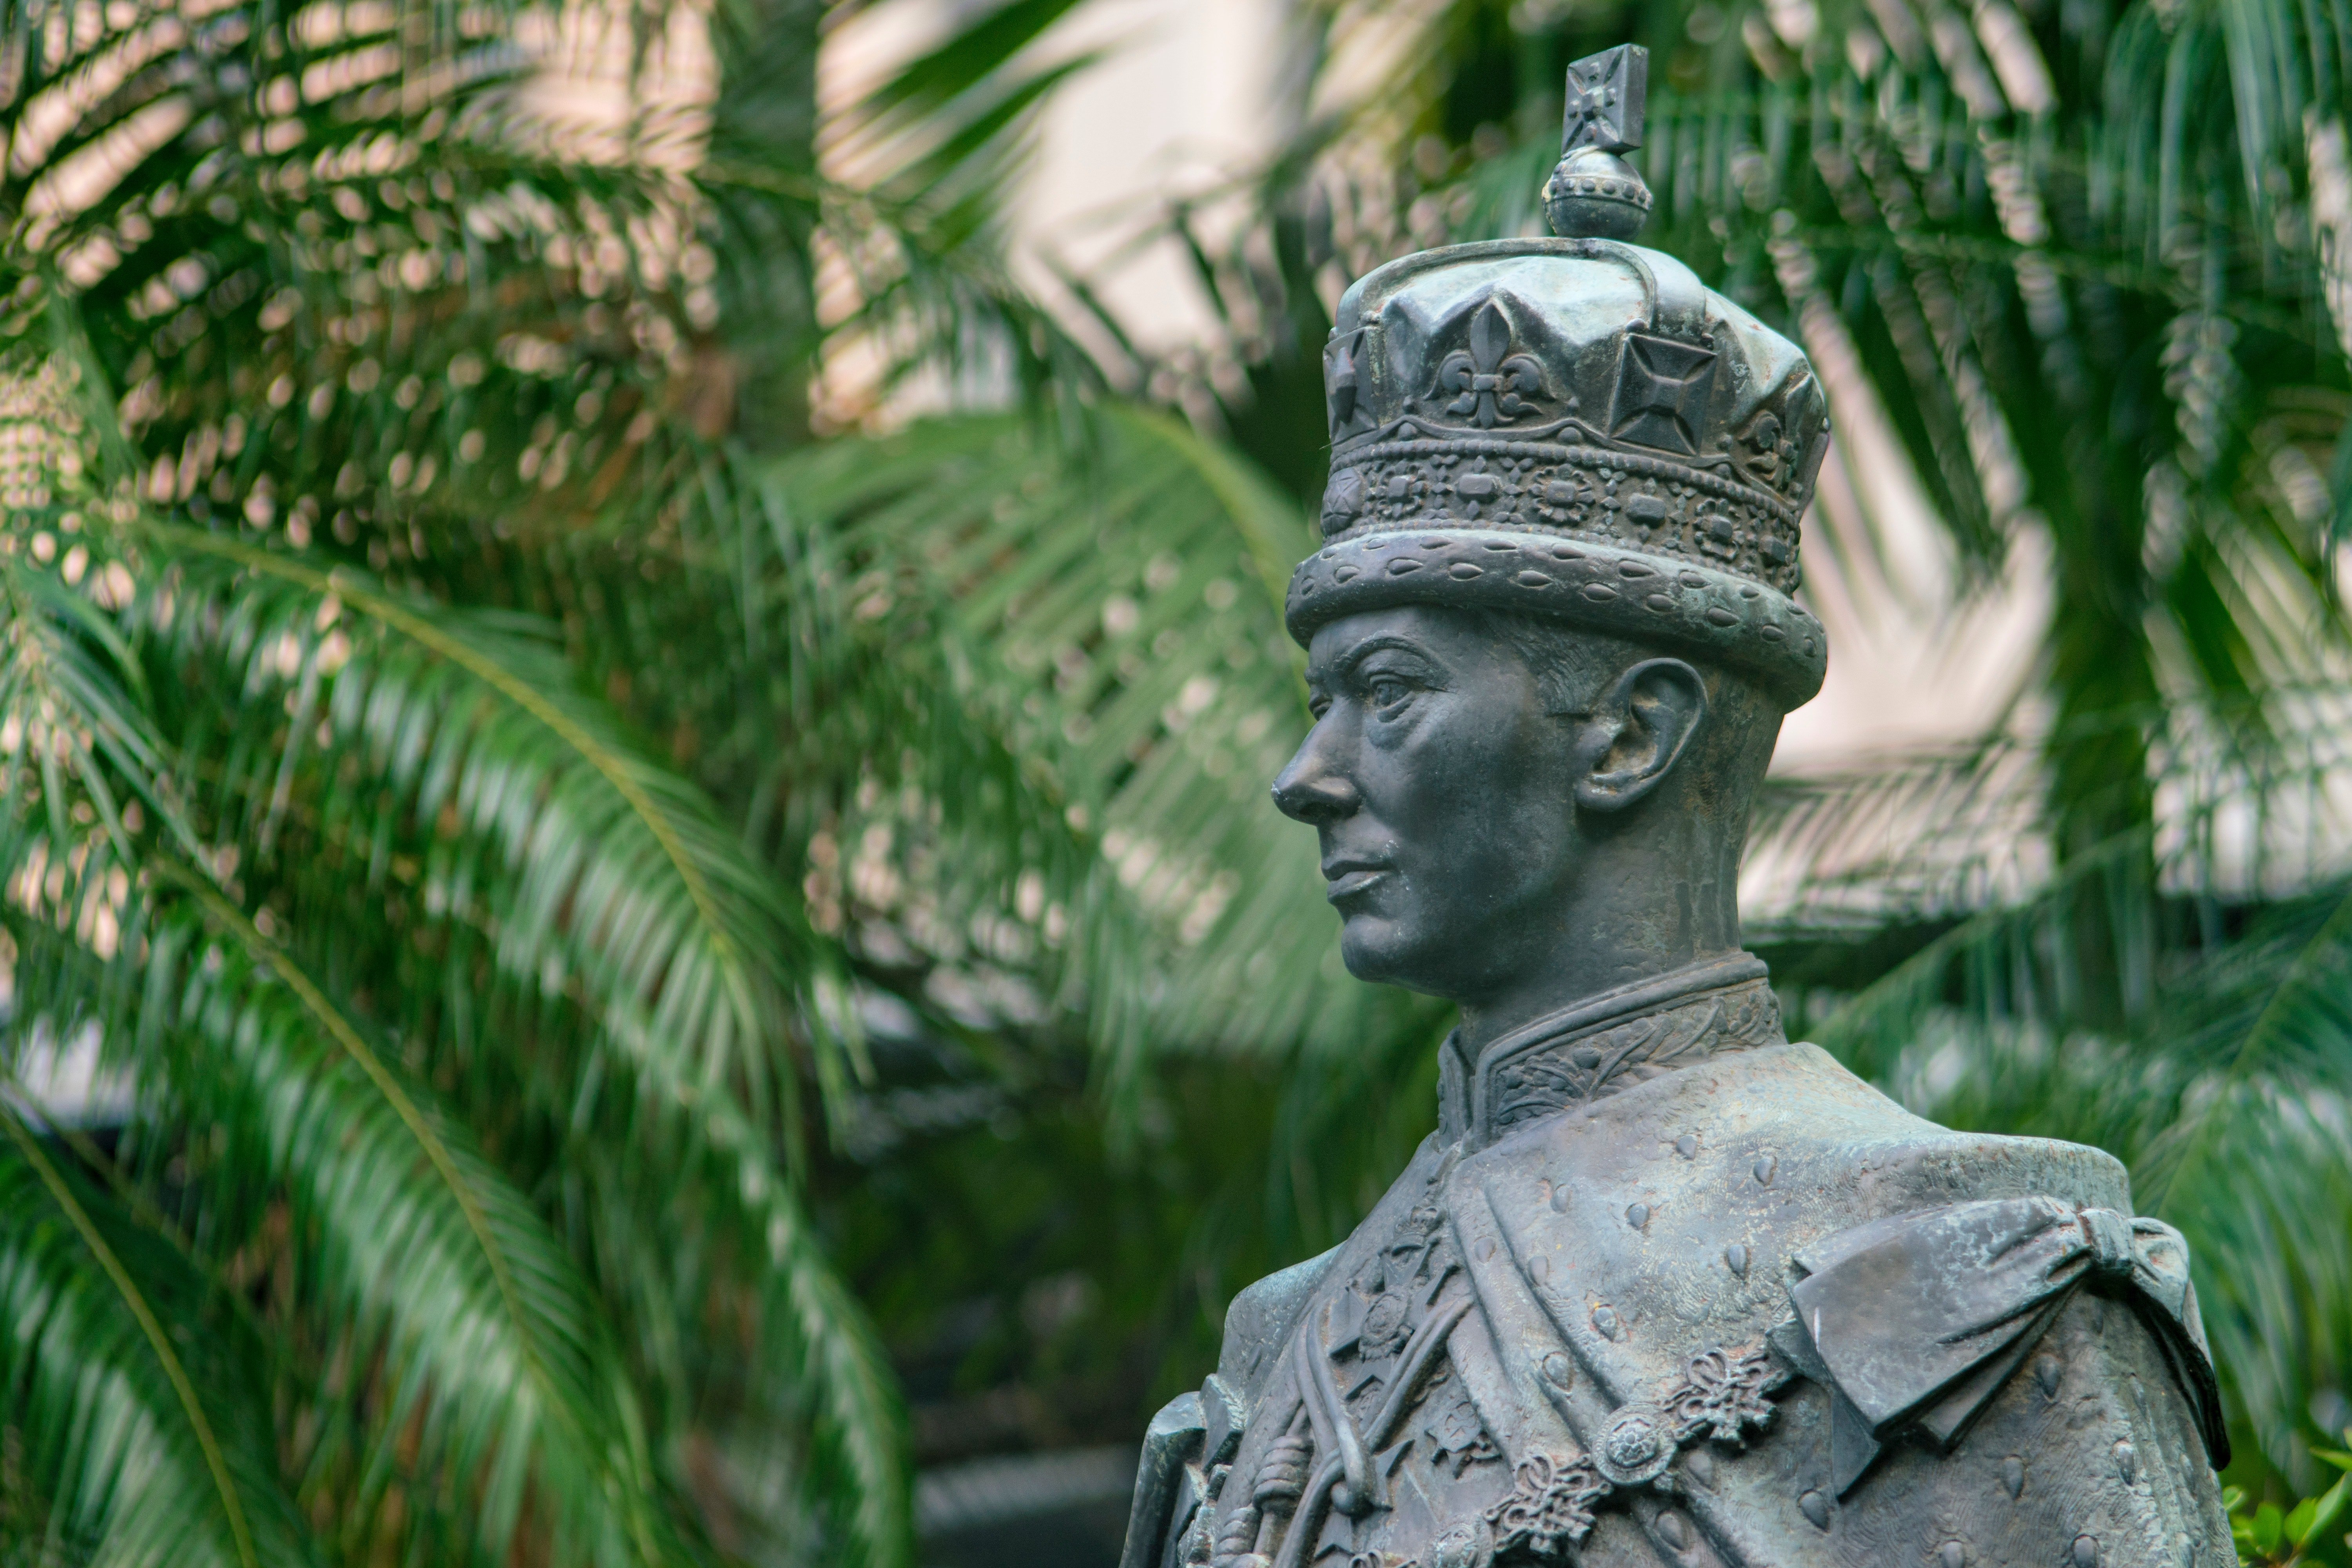 Pictured - A male statue near green palm trees | Source: Pexels 